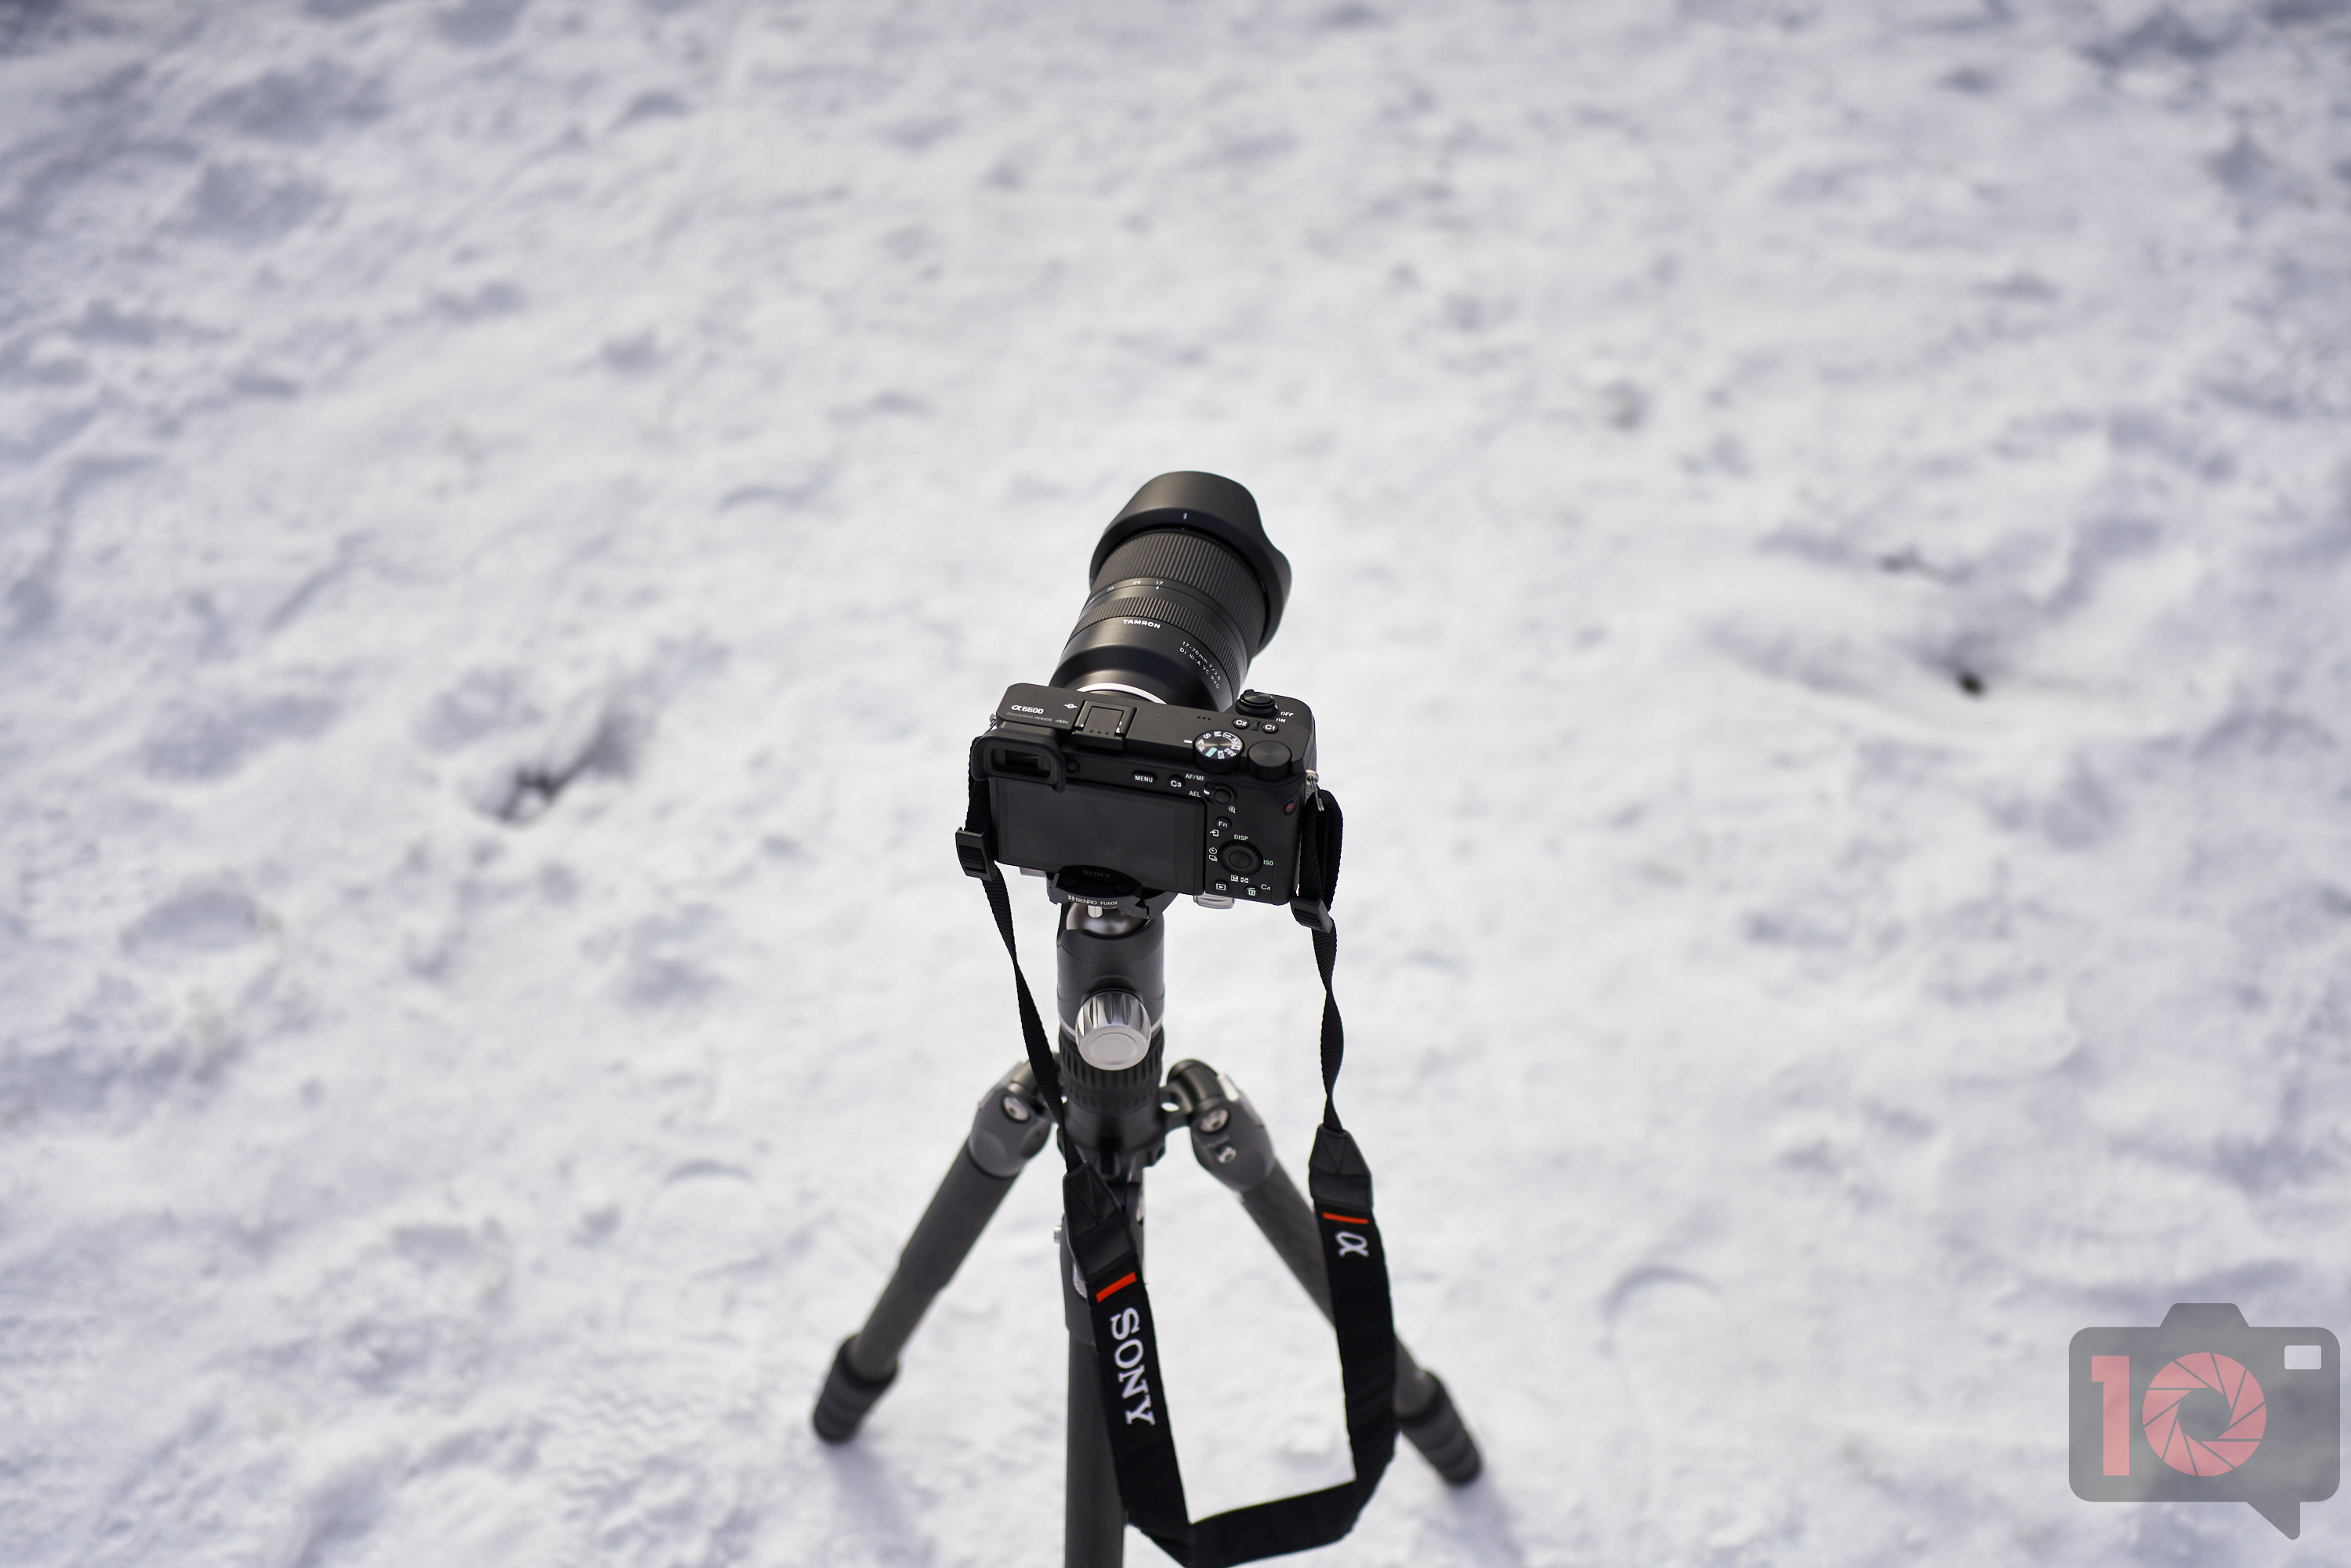 Chris Gampat The Phoblographer Benro Rhino Review tripod product images 2.21-8000s800